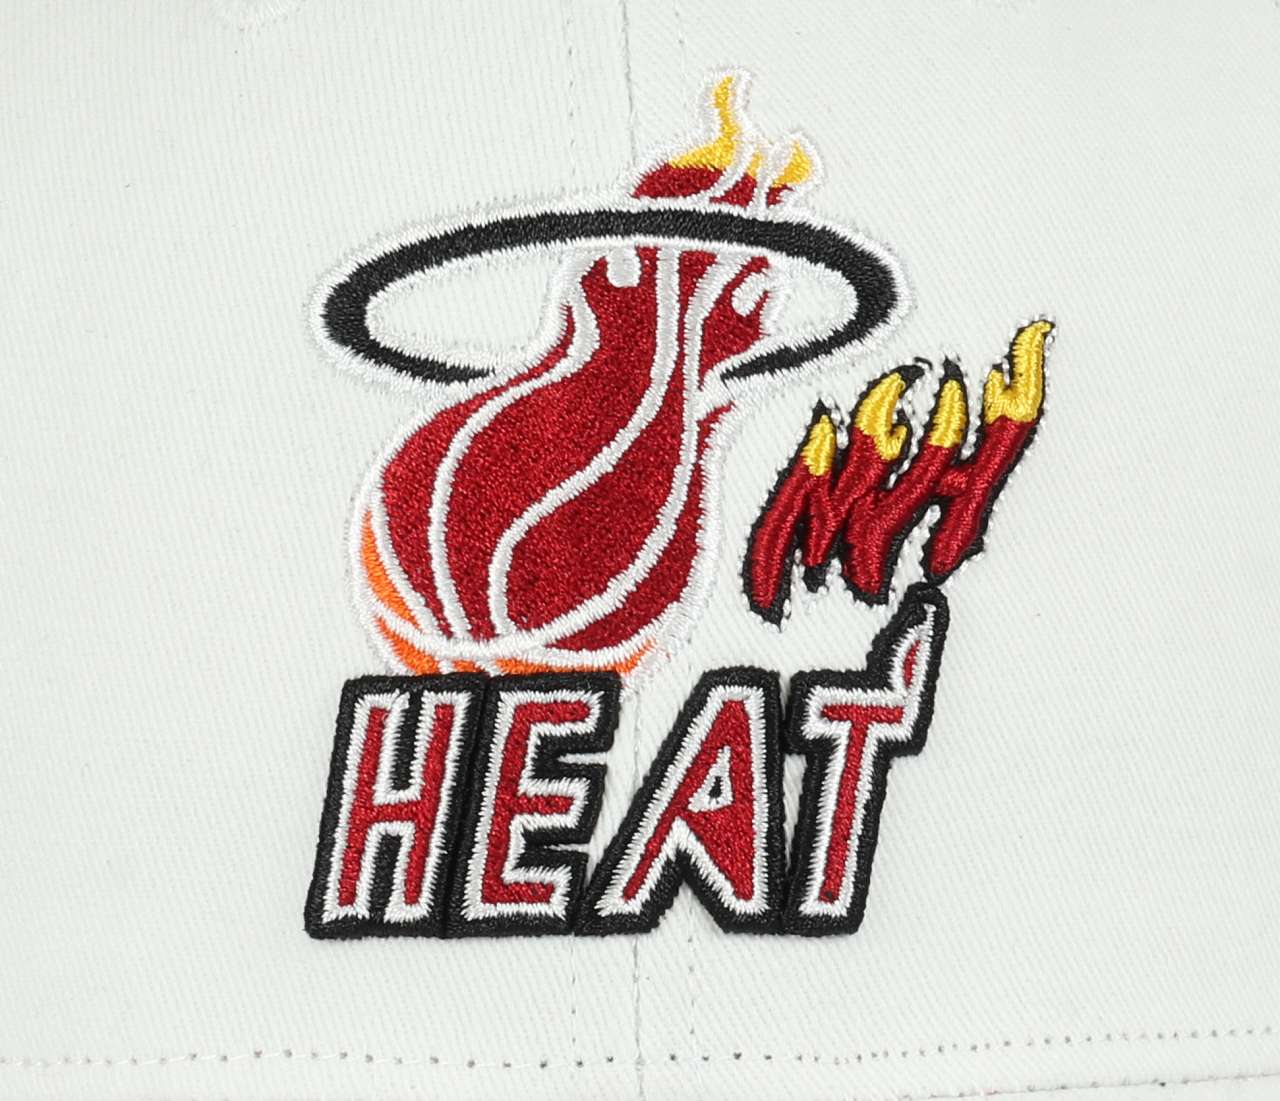 Miami Heat  NBA All In HWC Pro Crown Fit White Snapback Cap Mitchell & Ness